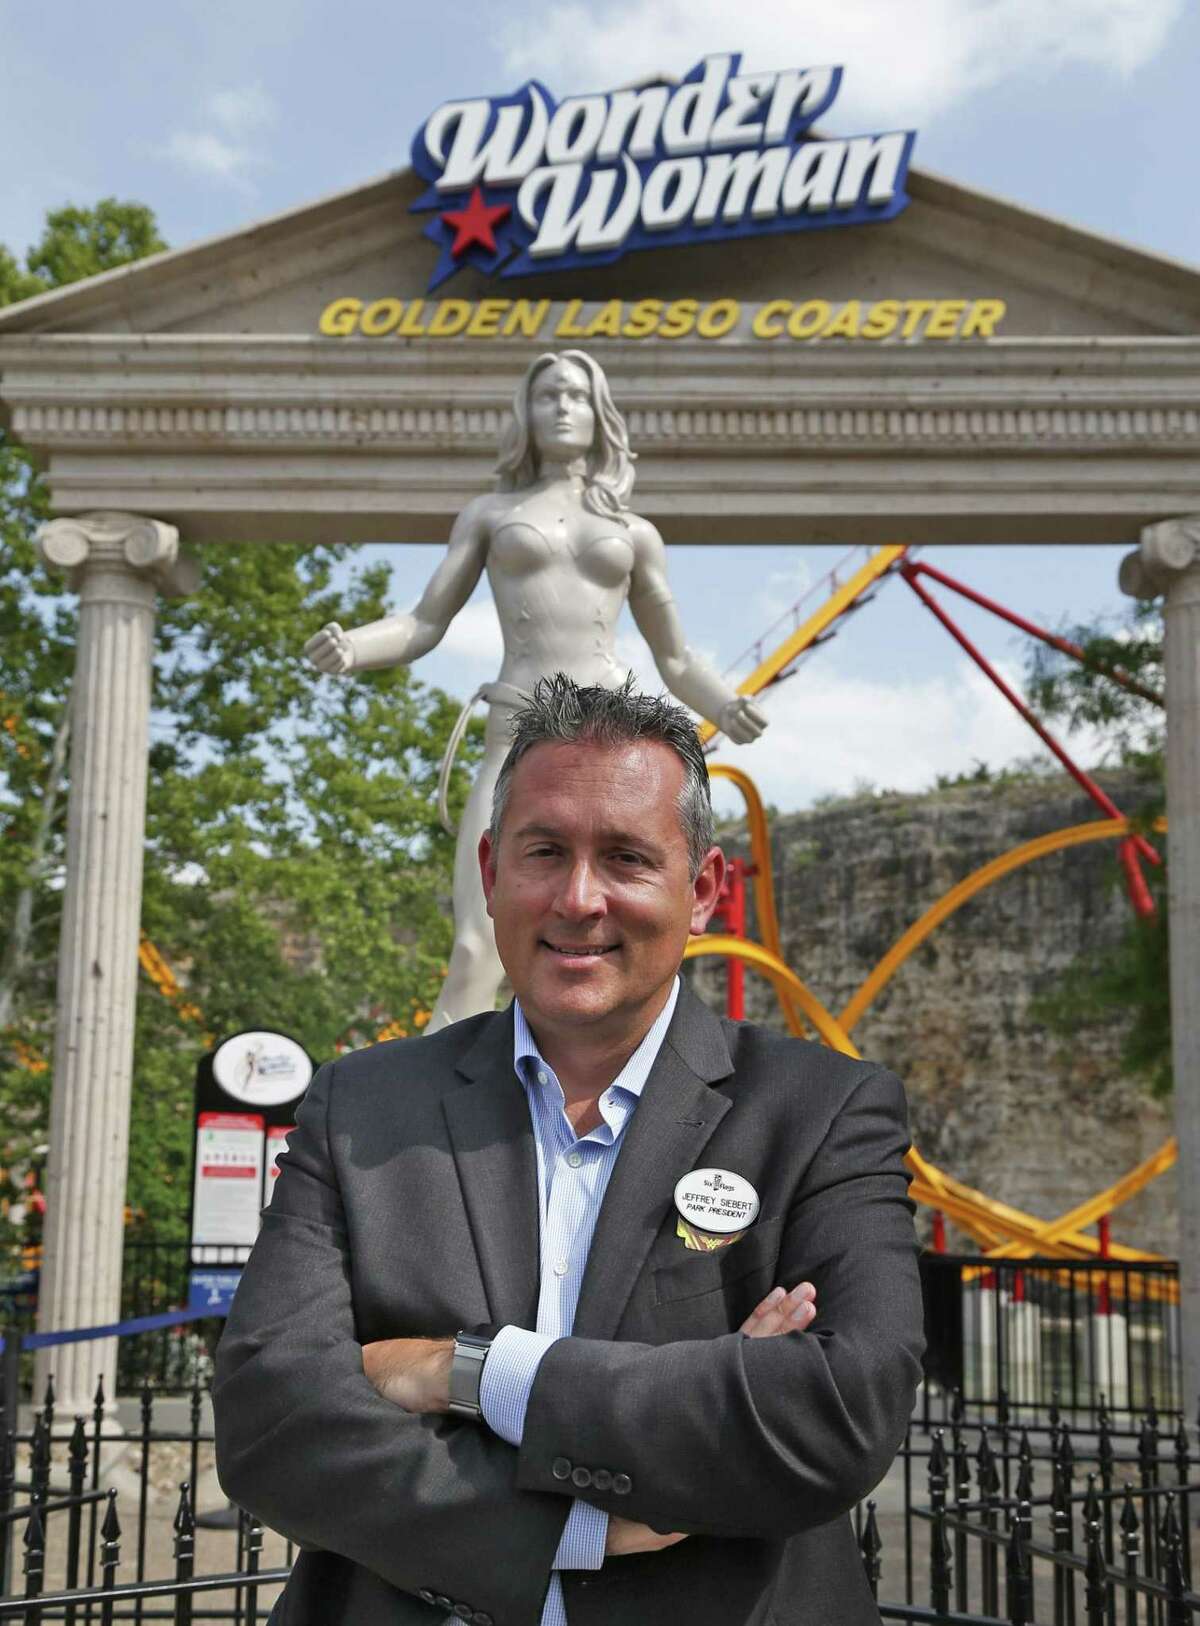 Six Flags Fiesta Texas president Jeffrey Siebert poses in front of Wonder Woman ride on Monday, May 14, 2018.